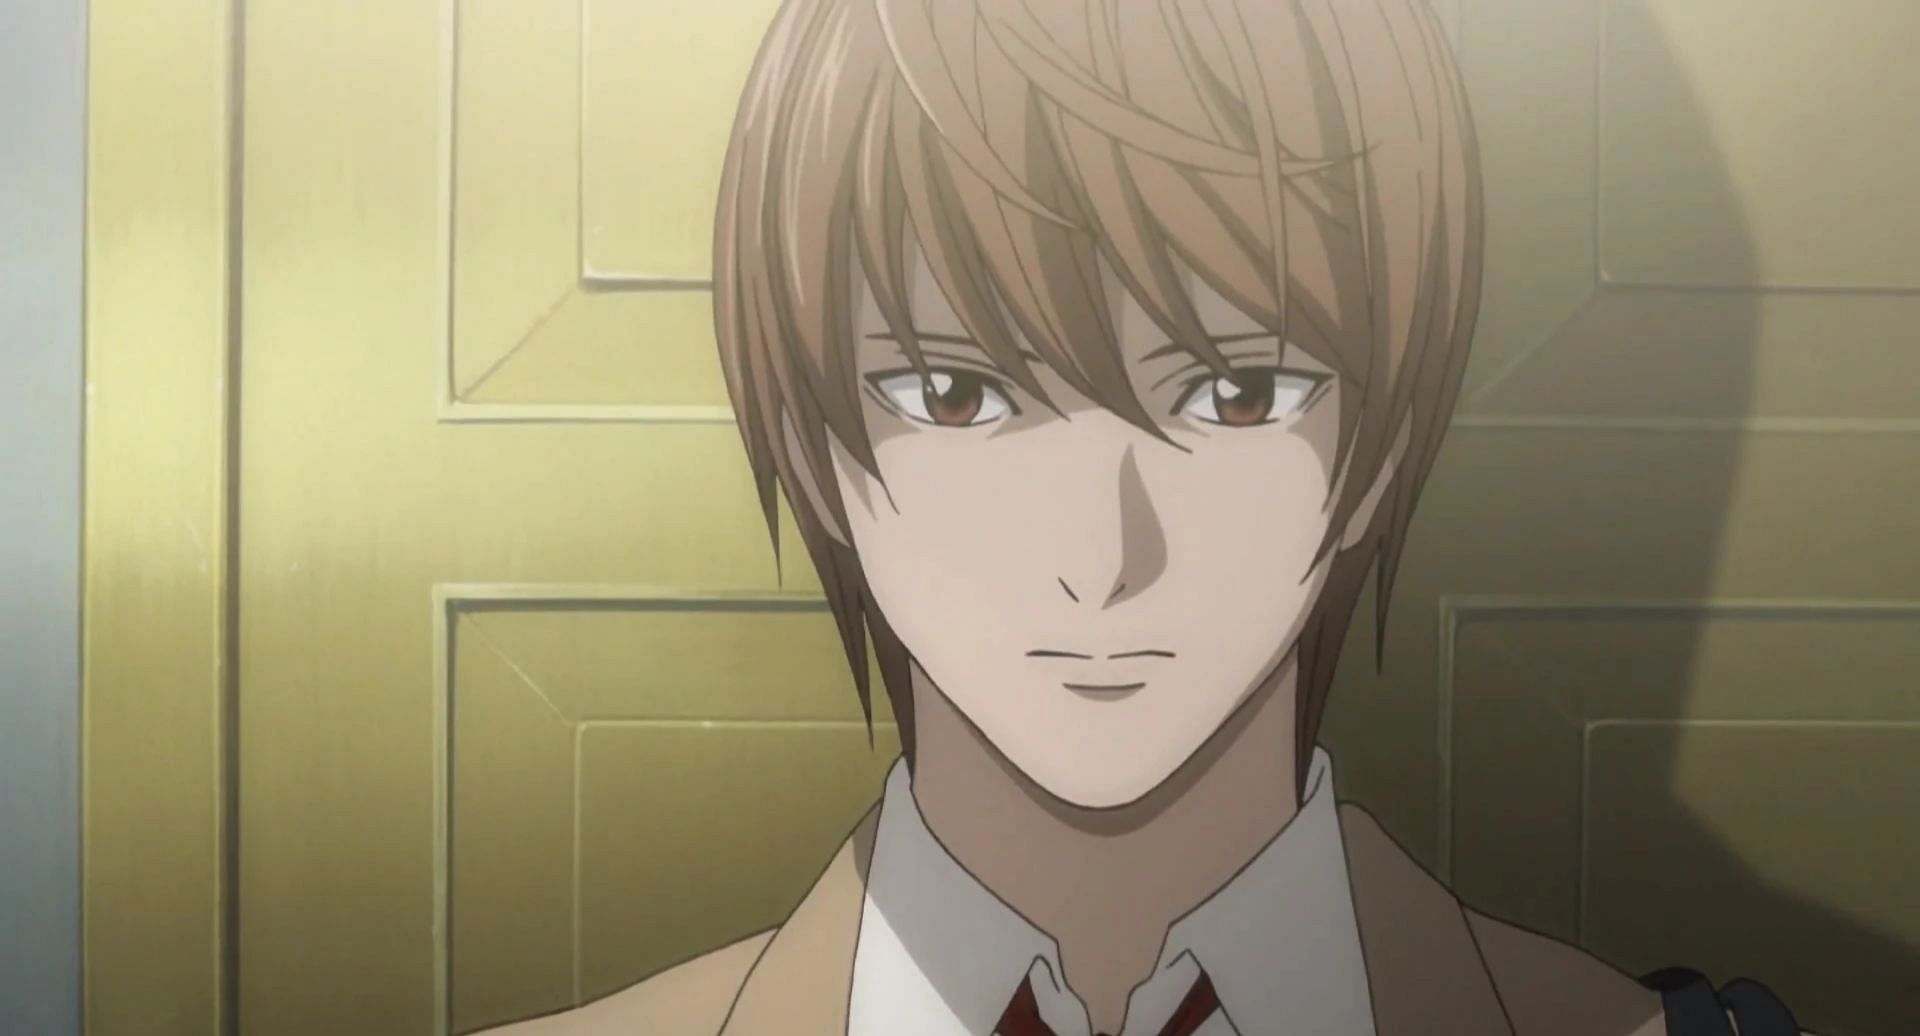 Light Yagami as seen in the anime Death Note (Image via Madhouse)